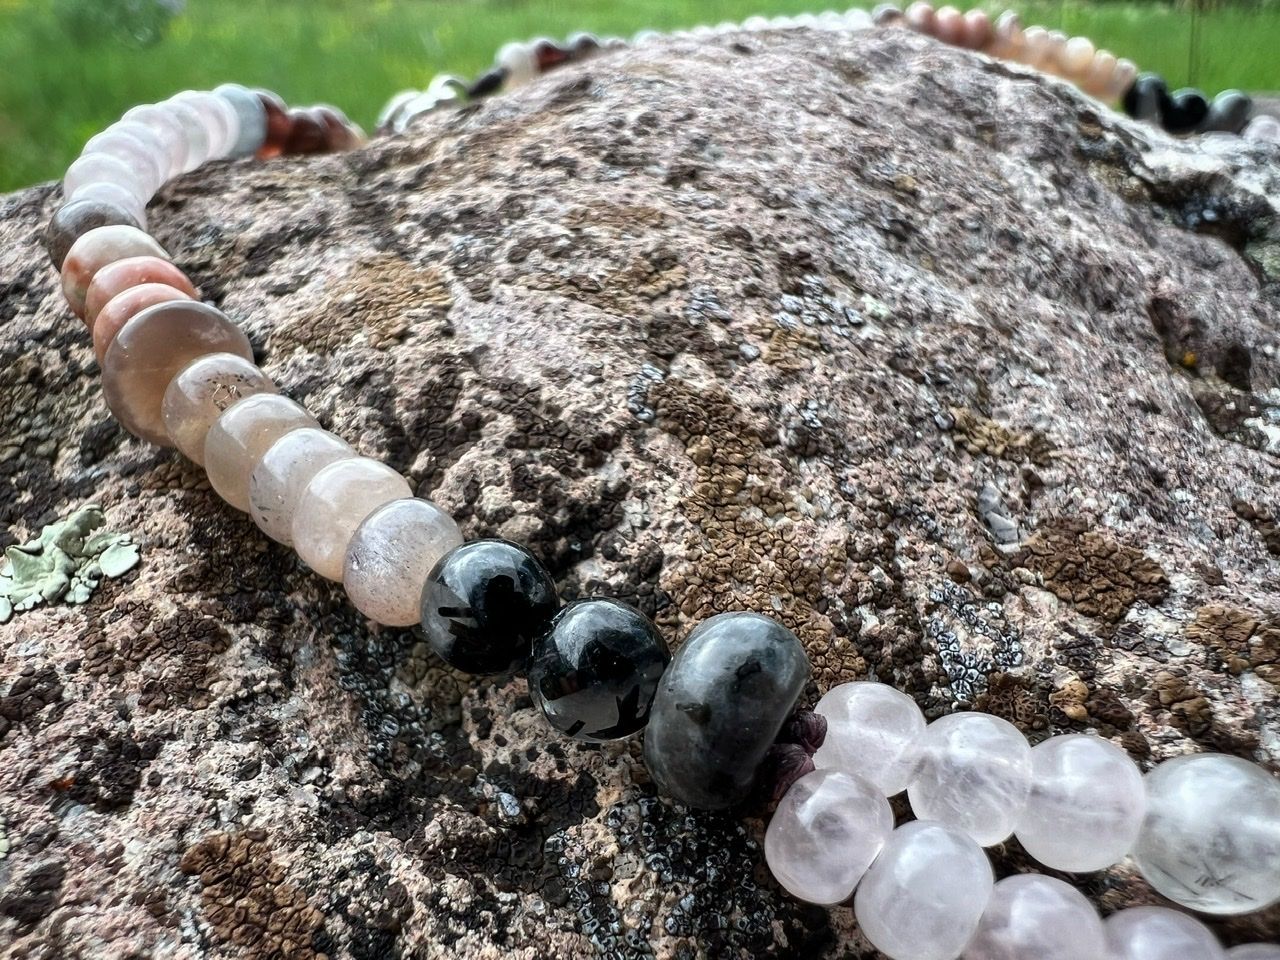 a stone beaded necklace in pale pinks, dusty pinks, black and grays lays on a lichen covered stone